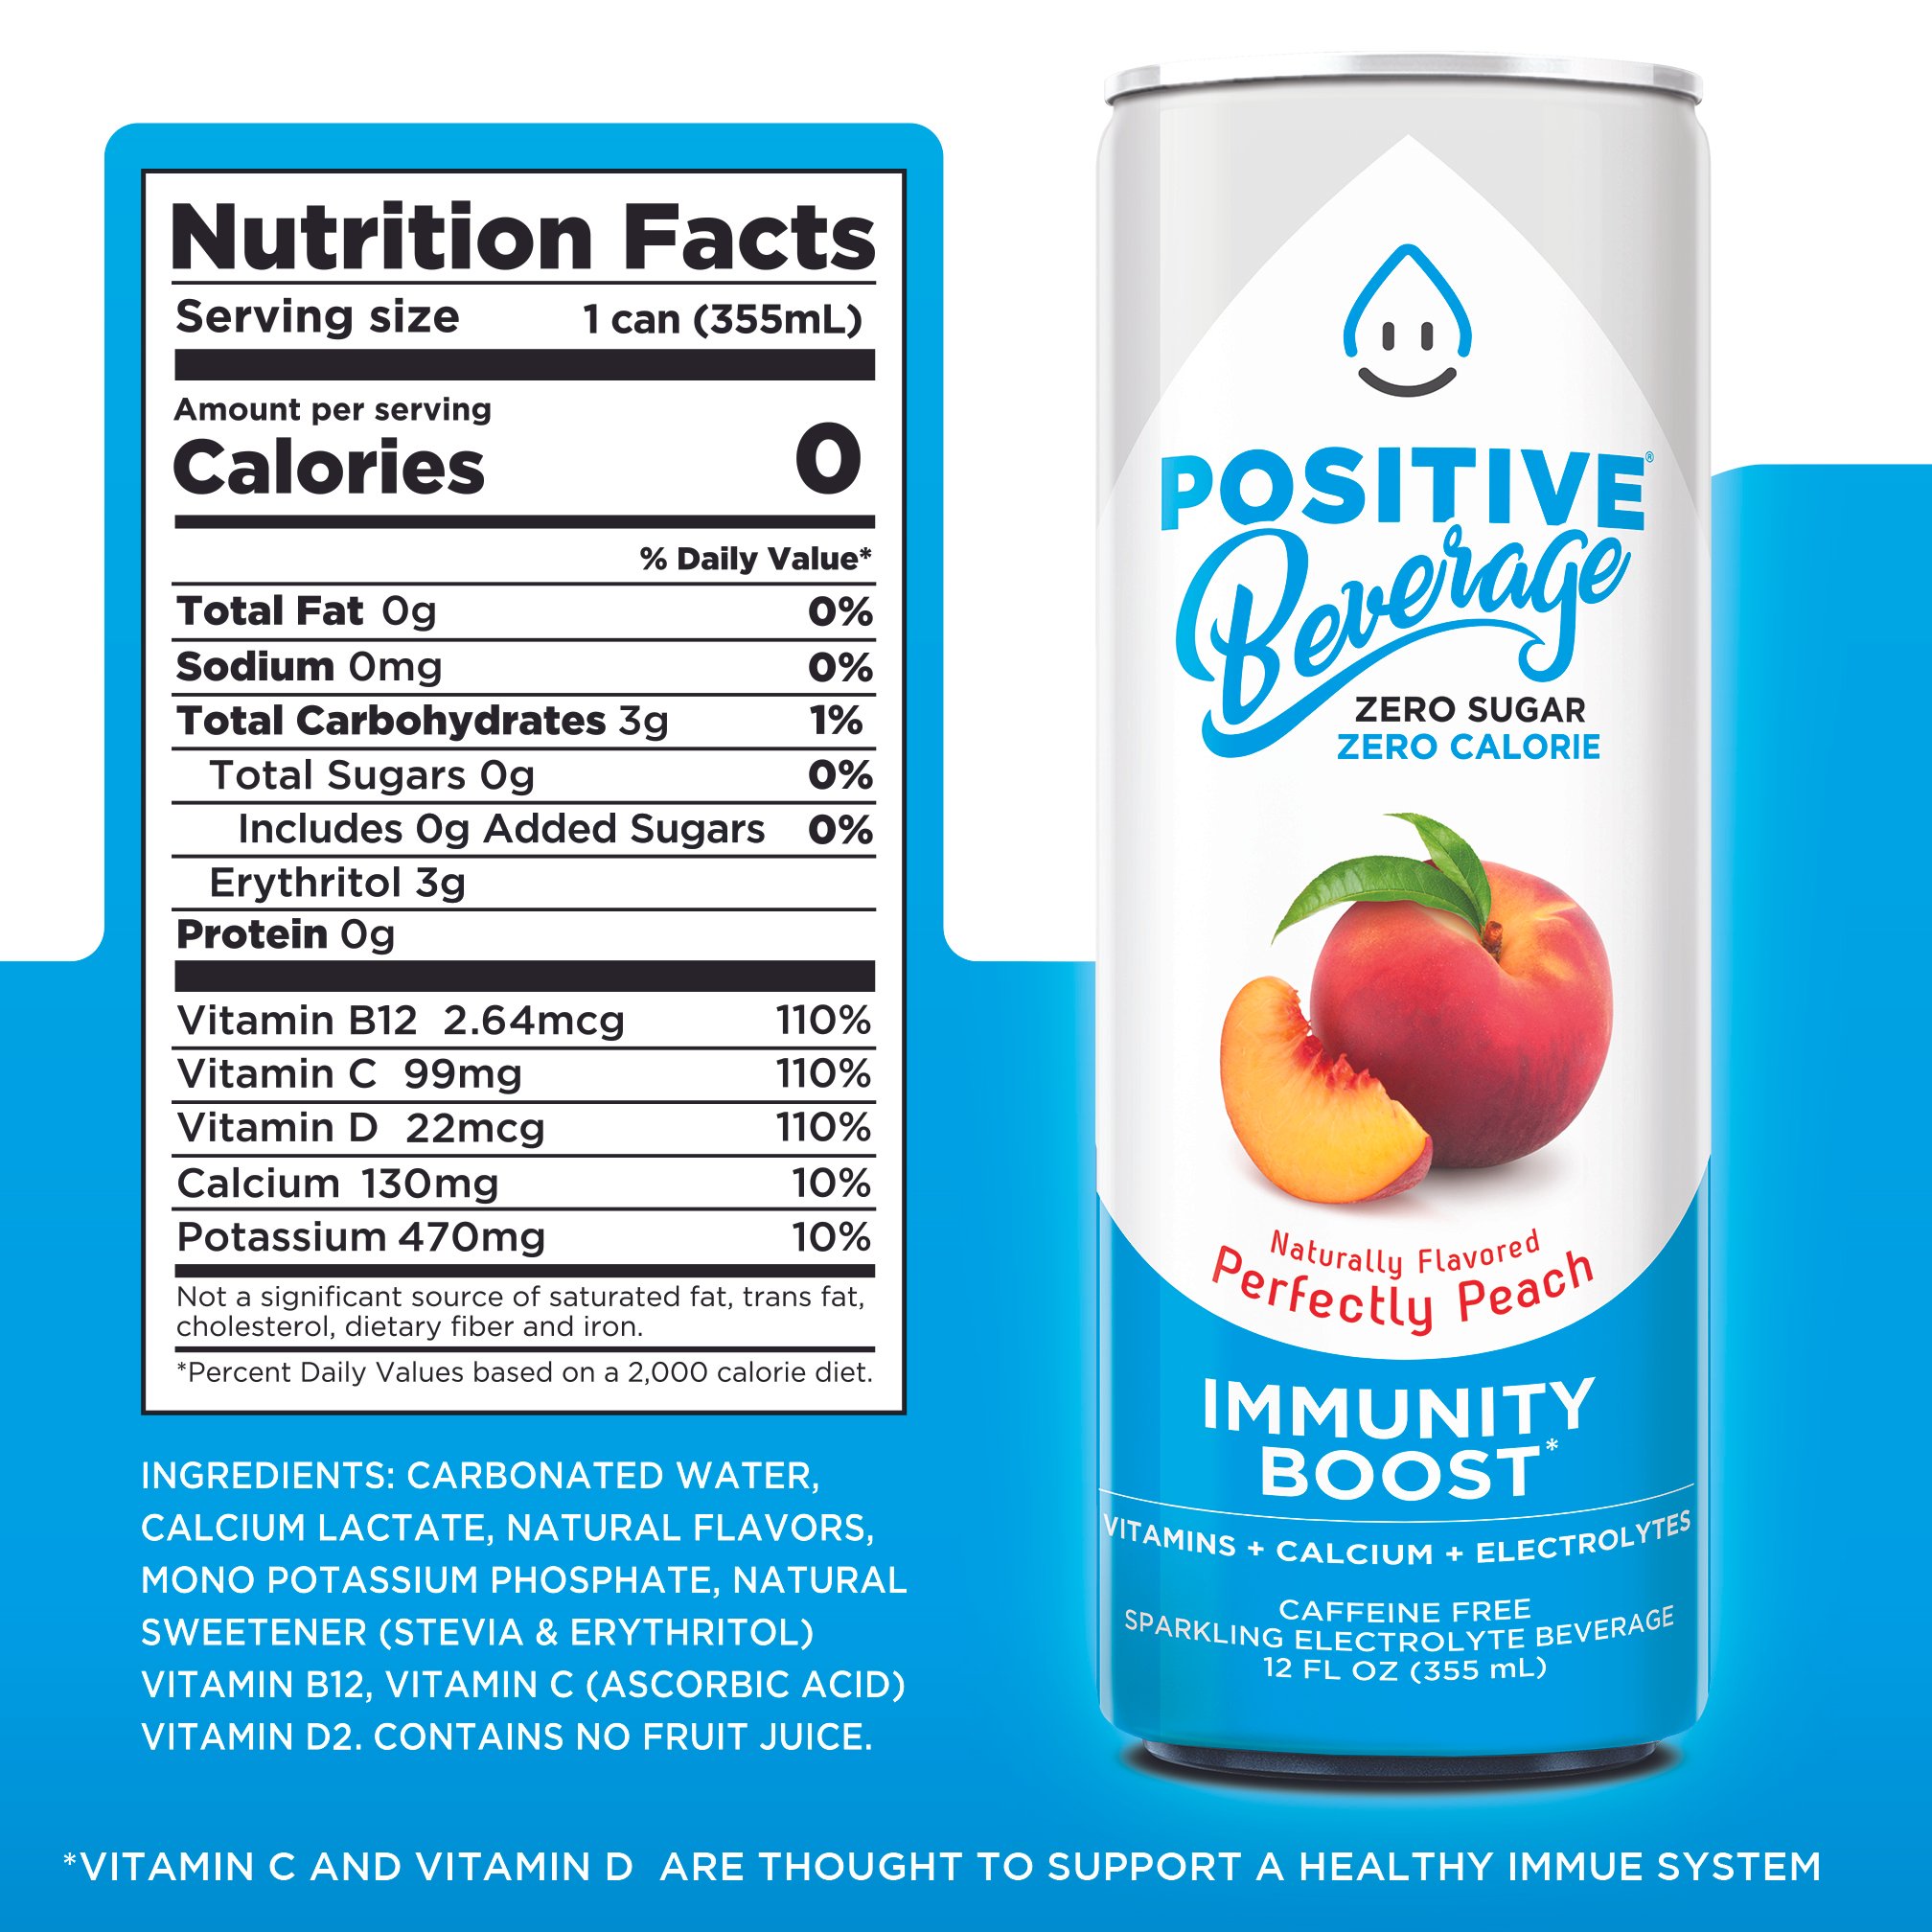 positive-beverage-drink-perfectly-peach-nutrition.jpg